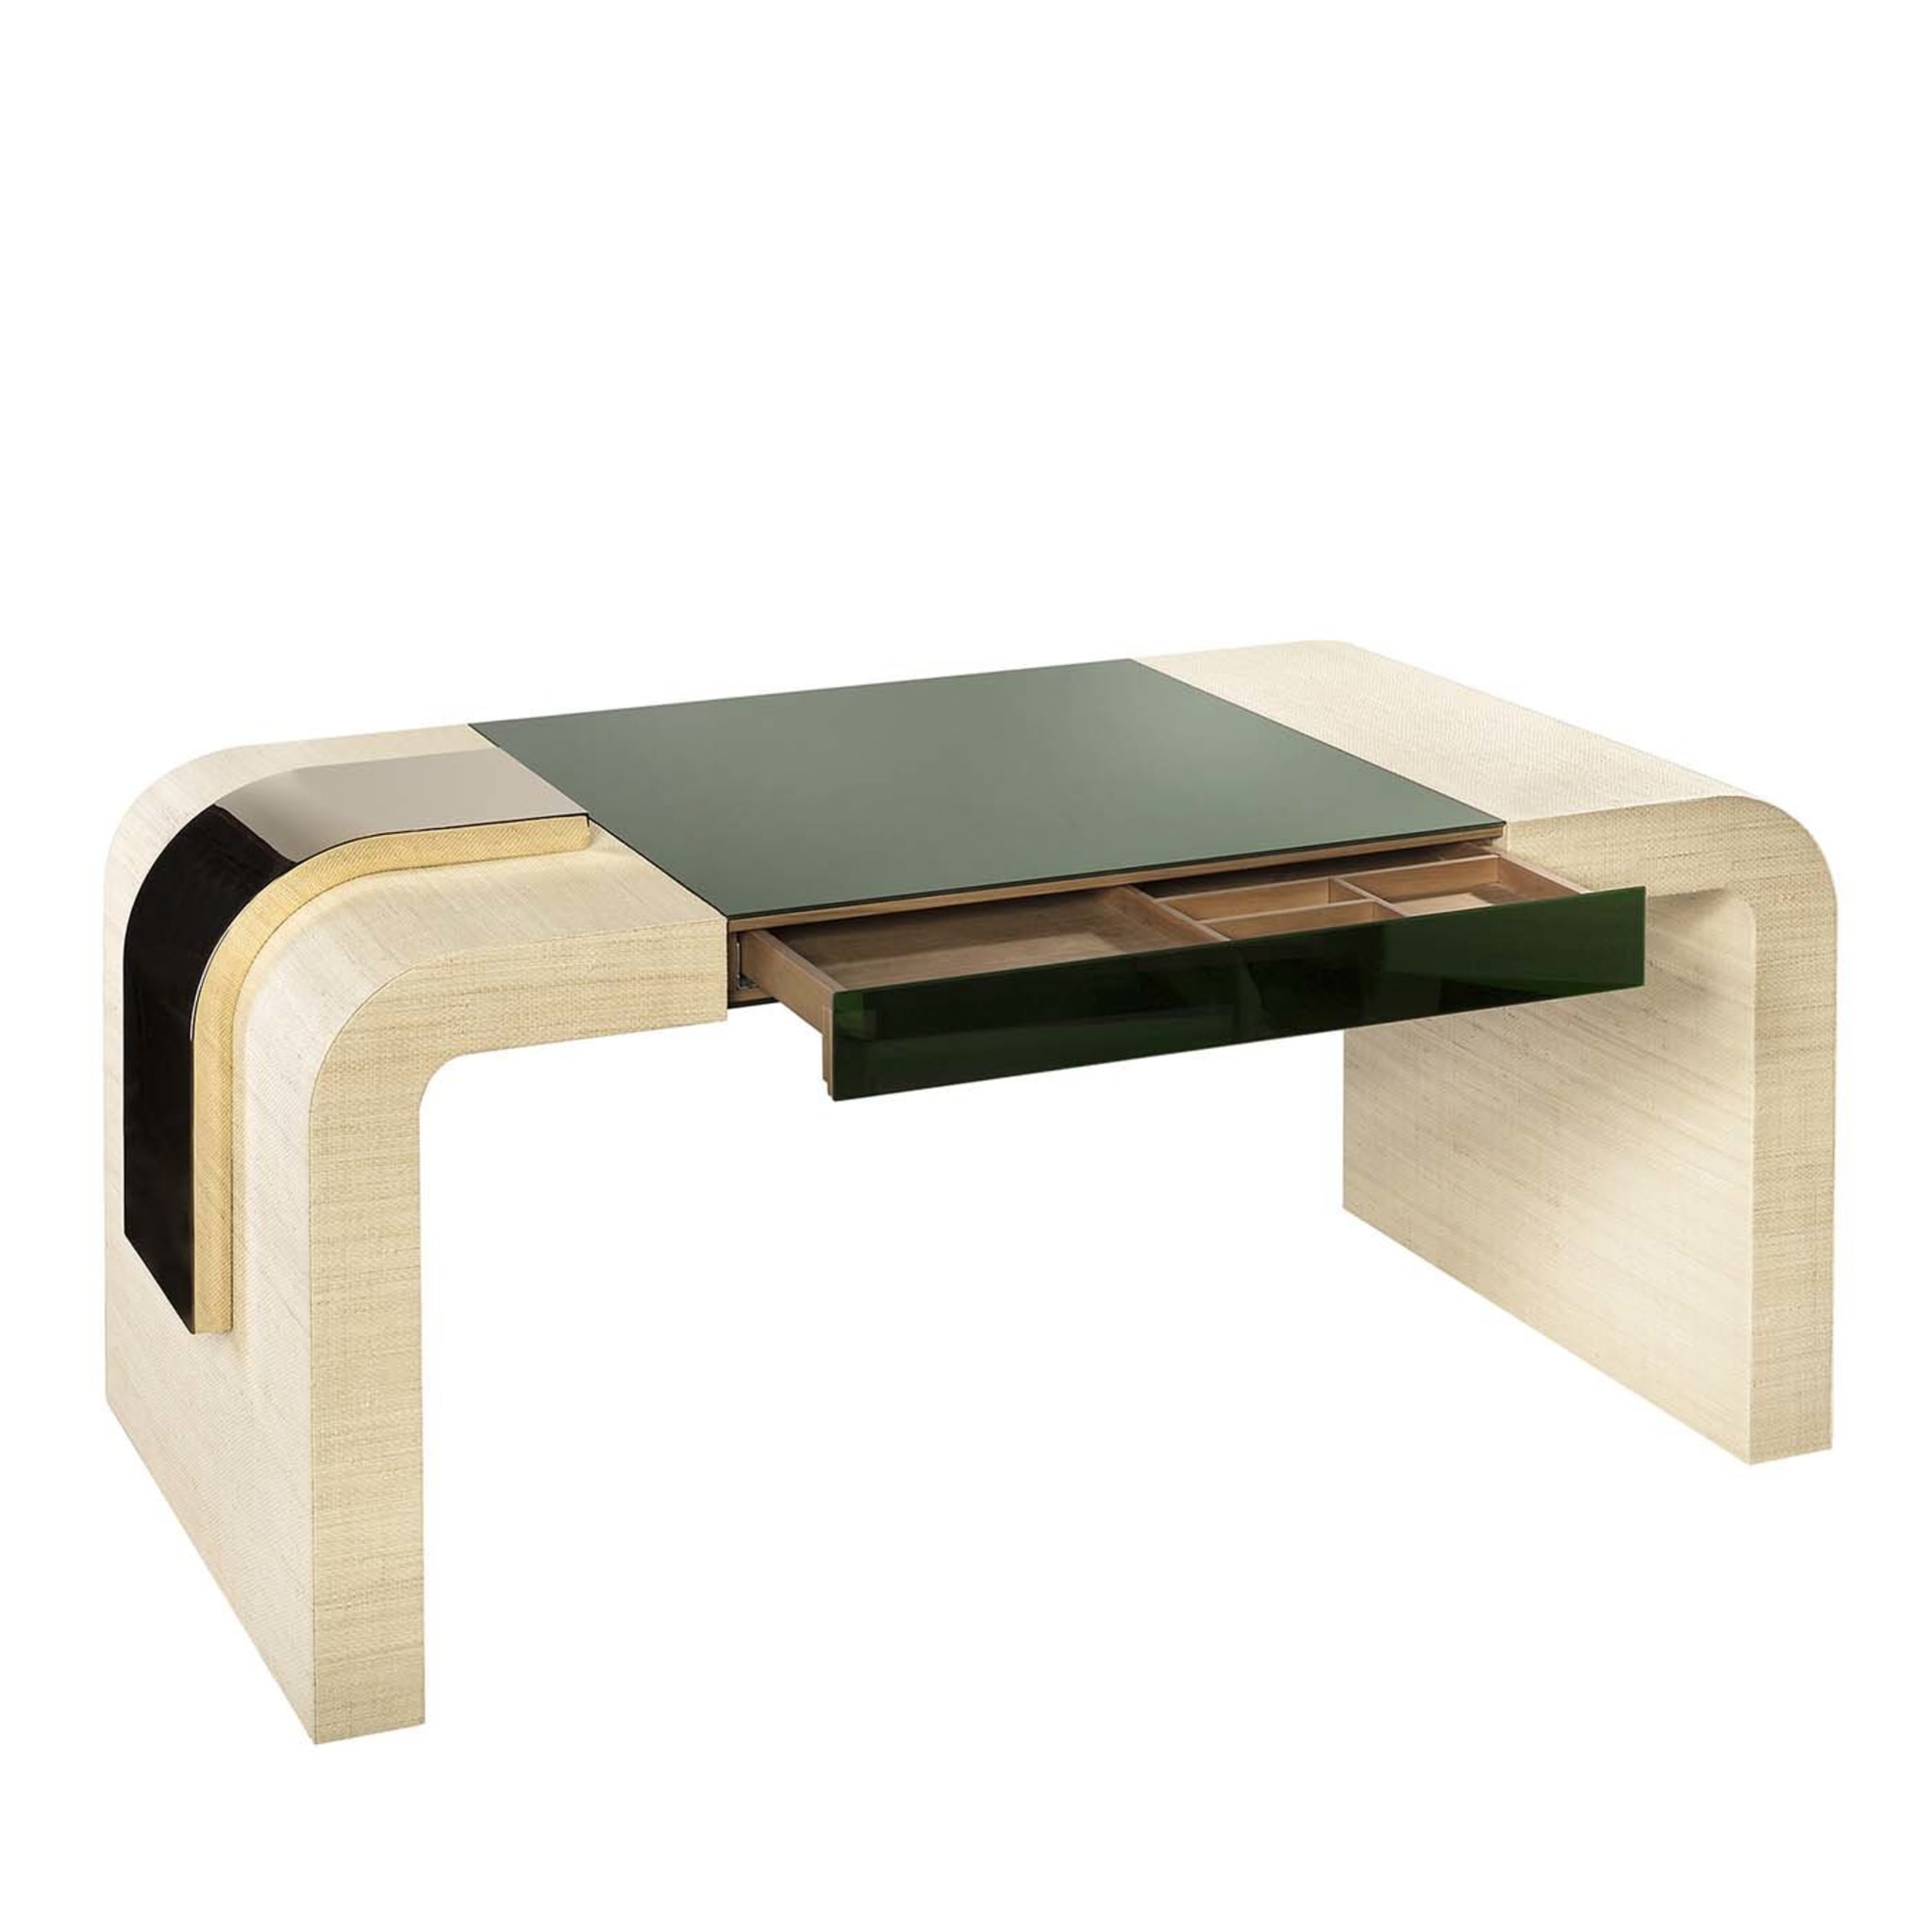 02.03 Collection Green Writing Desk - Alternative view 1